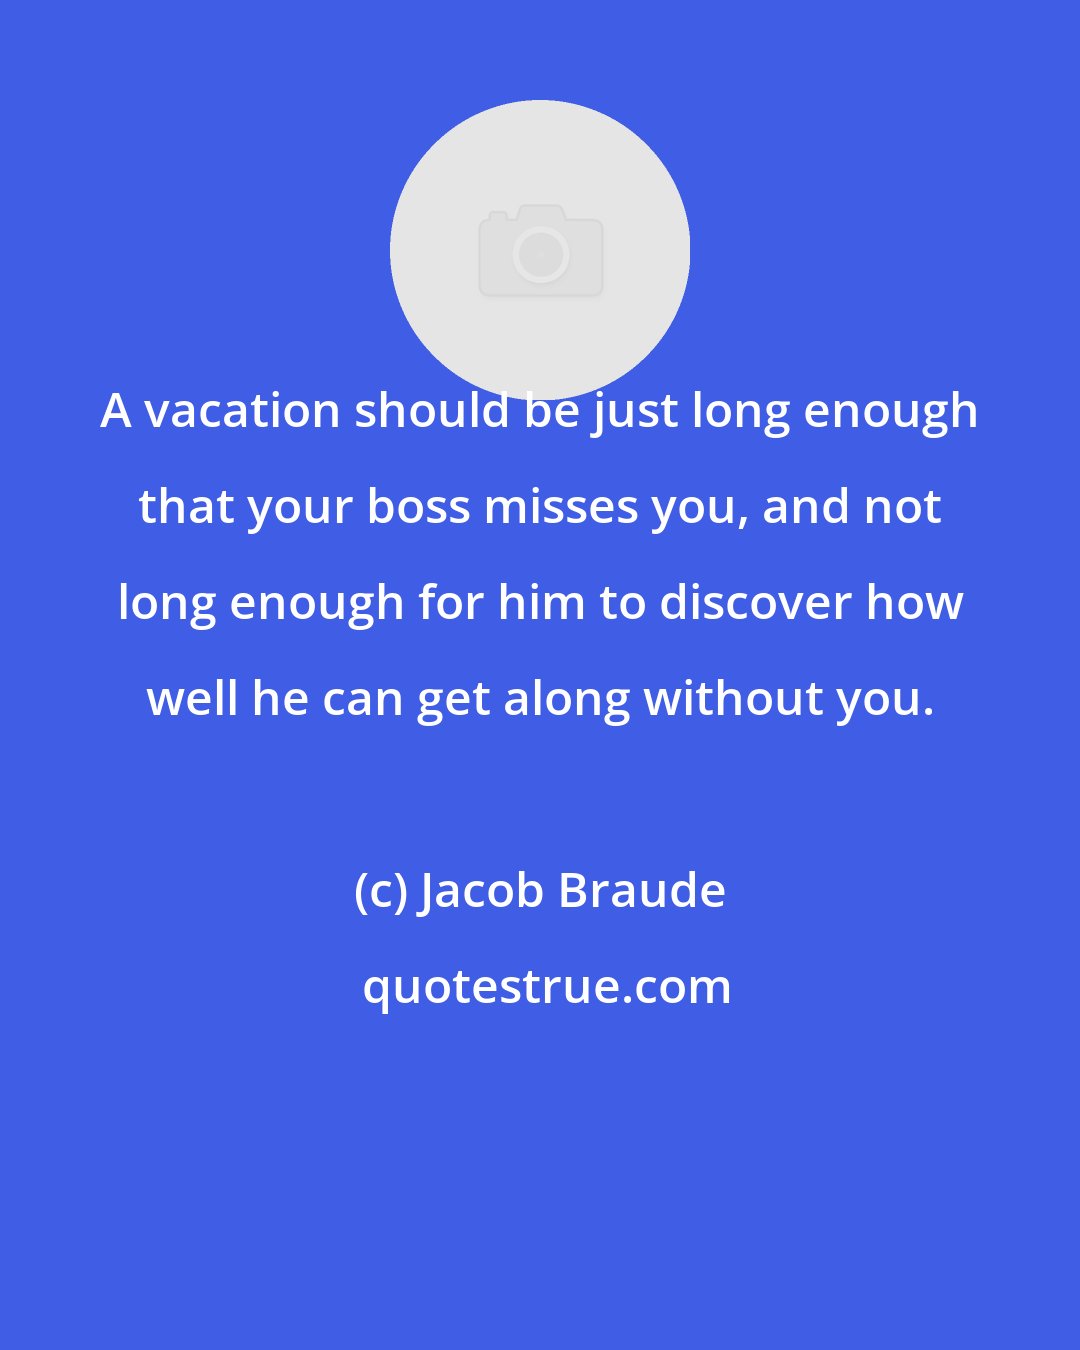 Jacob Braude: A vacation should be just long enough that your boss misses you, and not long enough for him to discover how well he can get along without you.